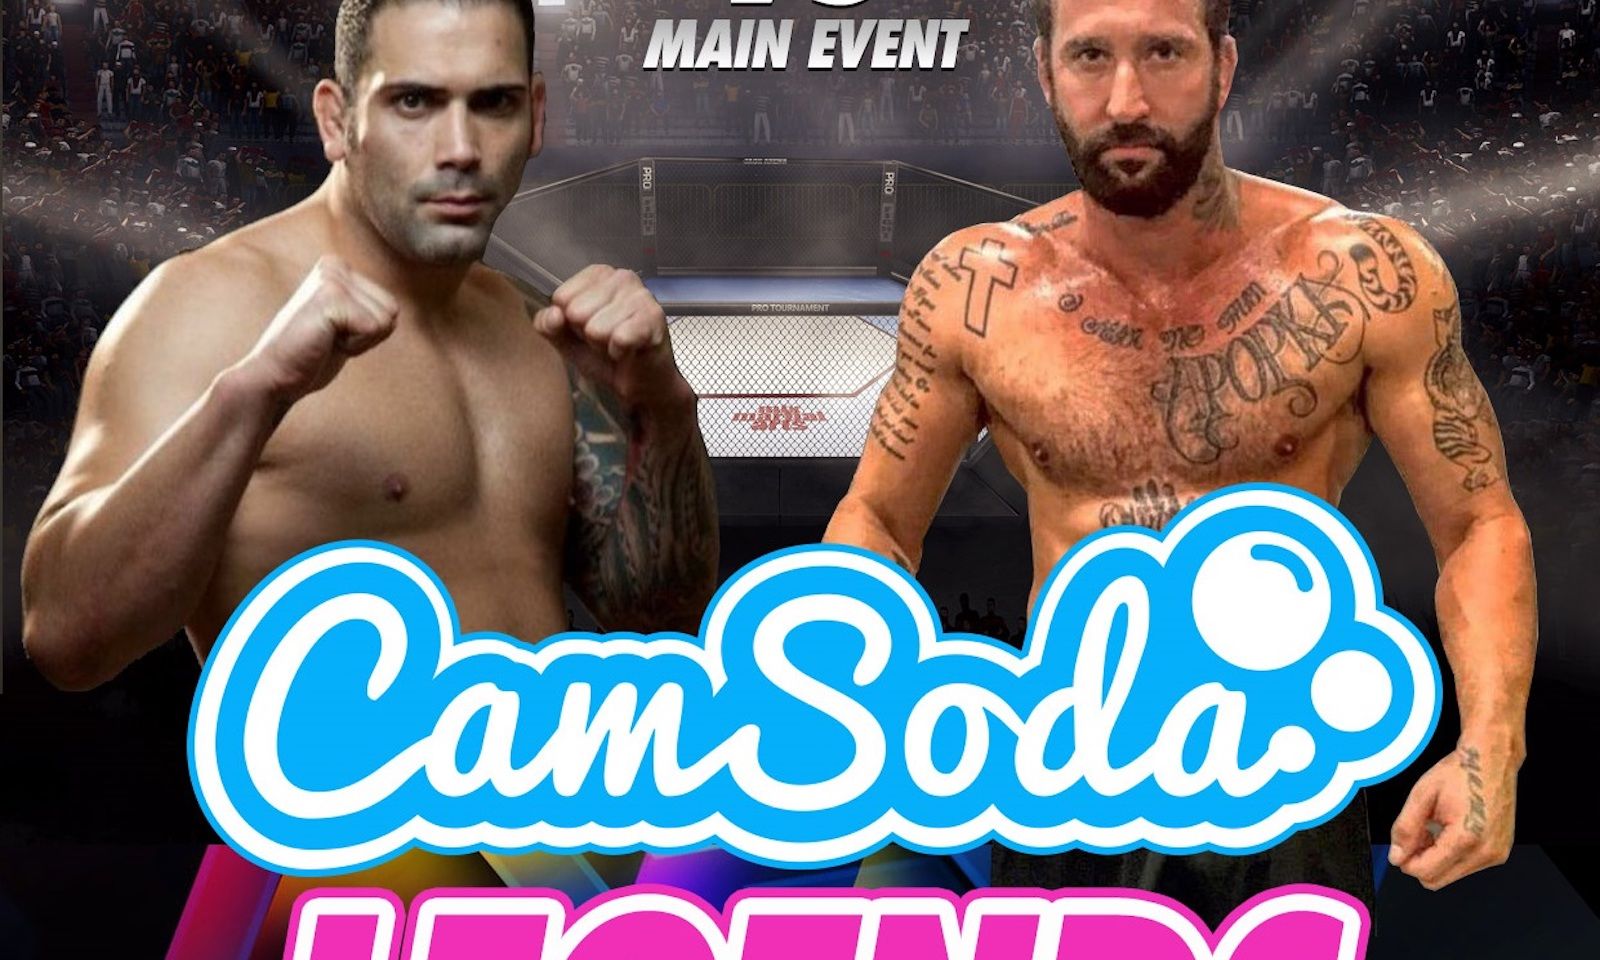 CamSoda Streamed an MMA Fight Card, Here’s What Happened